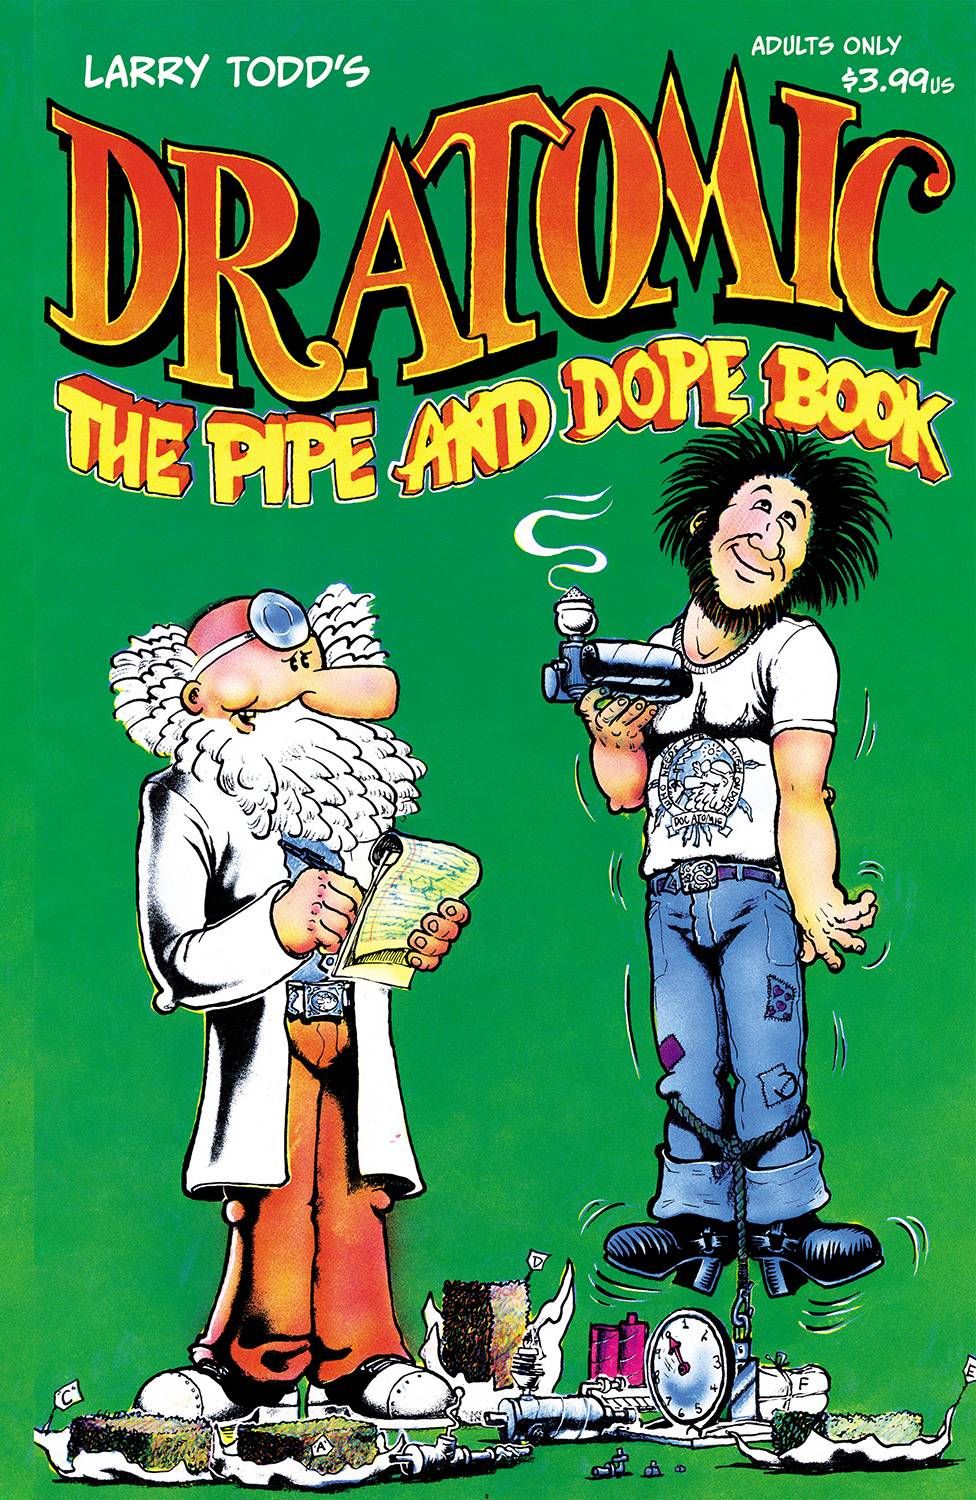 Dr. Atomic: The Pipe and Dope Book Comic